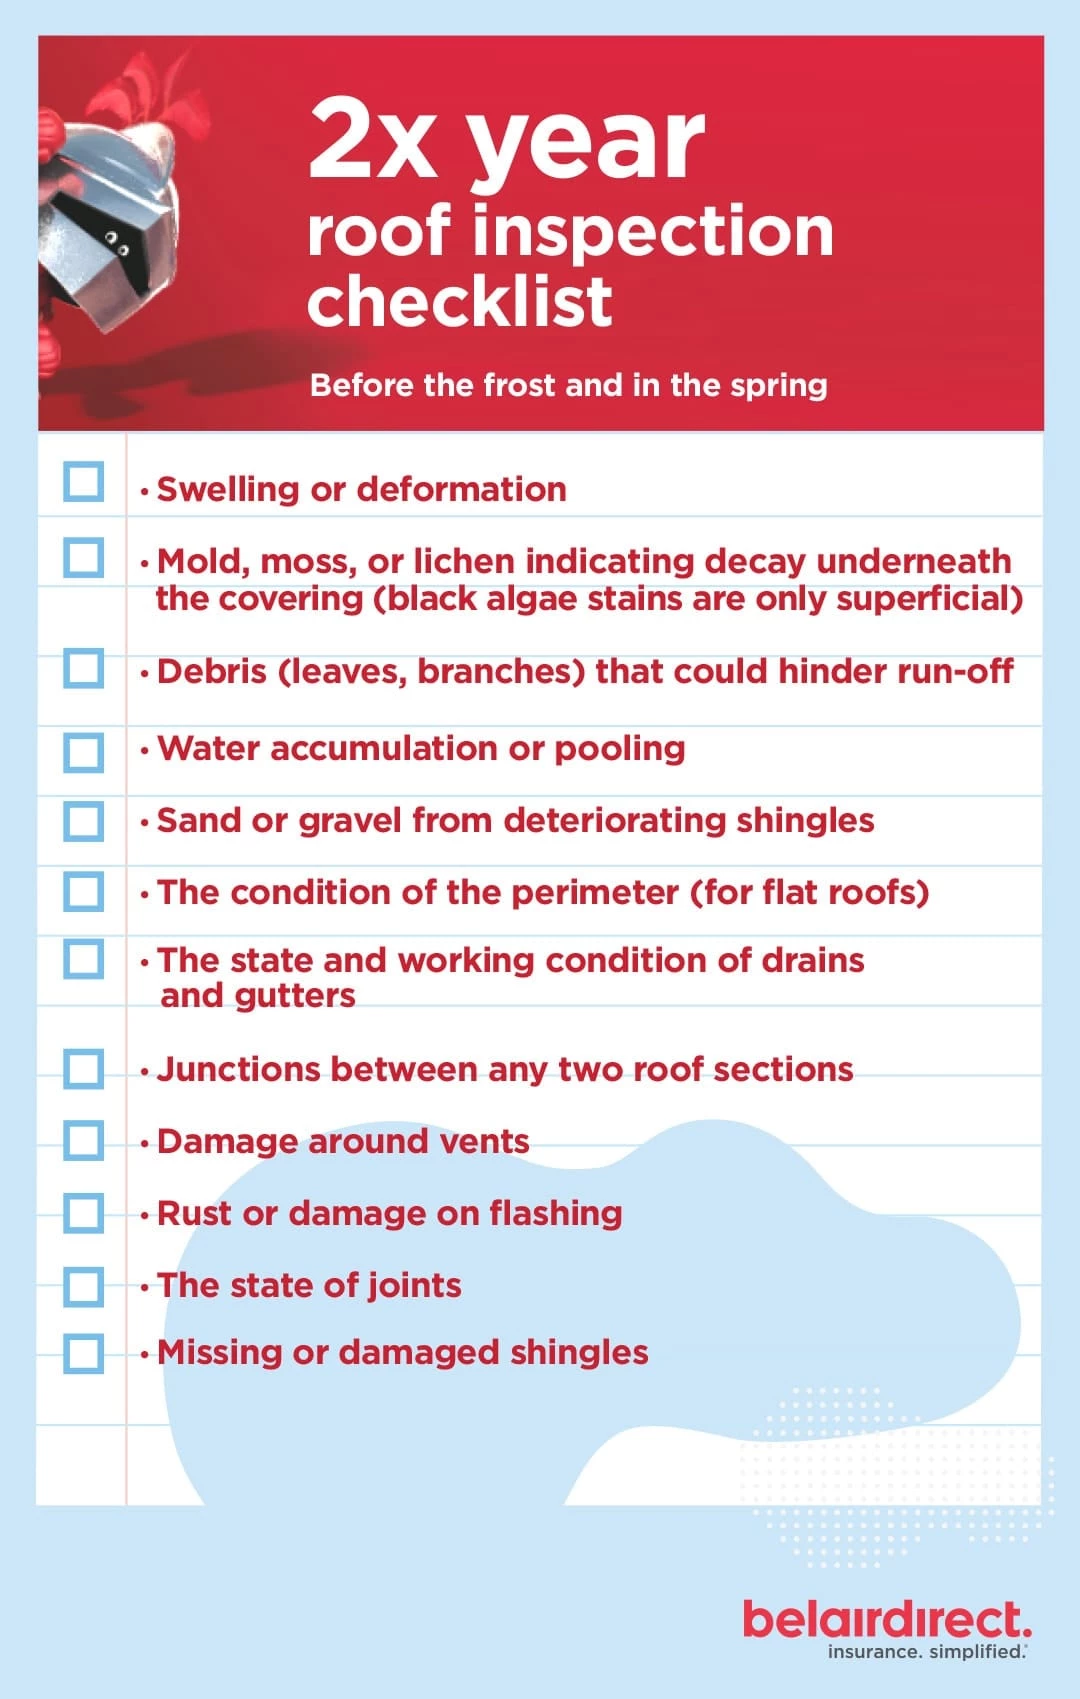 roofing checklist, swelling, deformation, water accumulation, pooling, damage, flashing, damaged shingles, junctions, drains, gutters